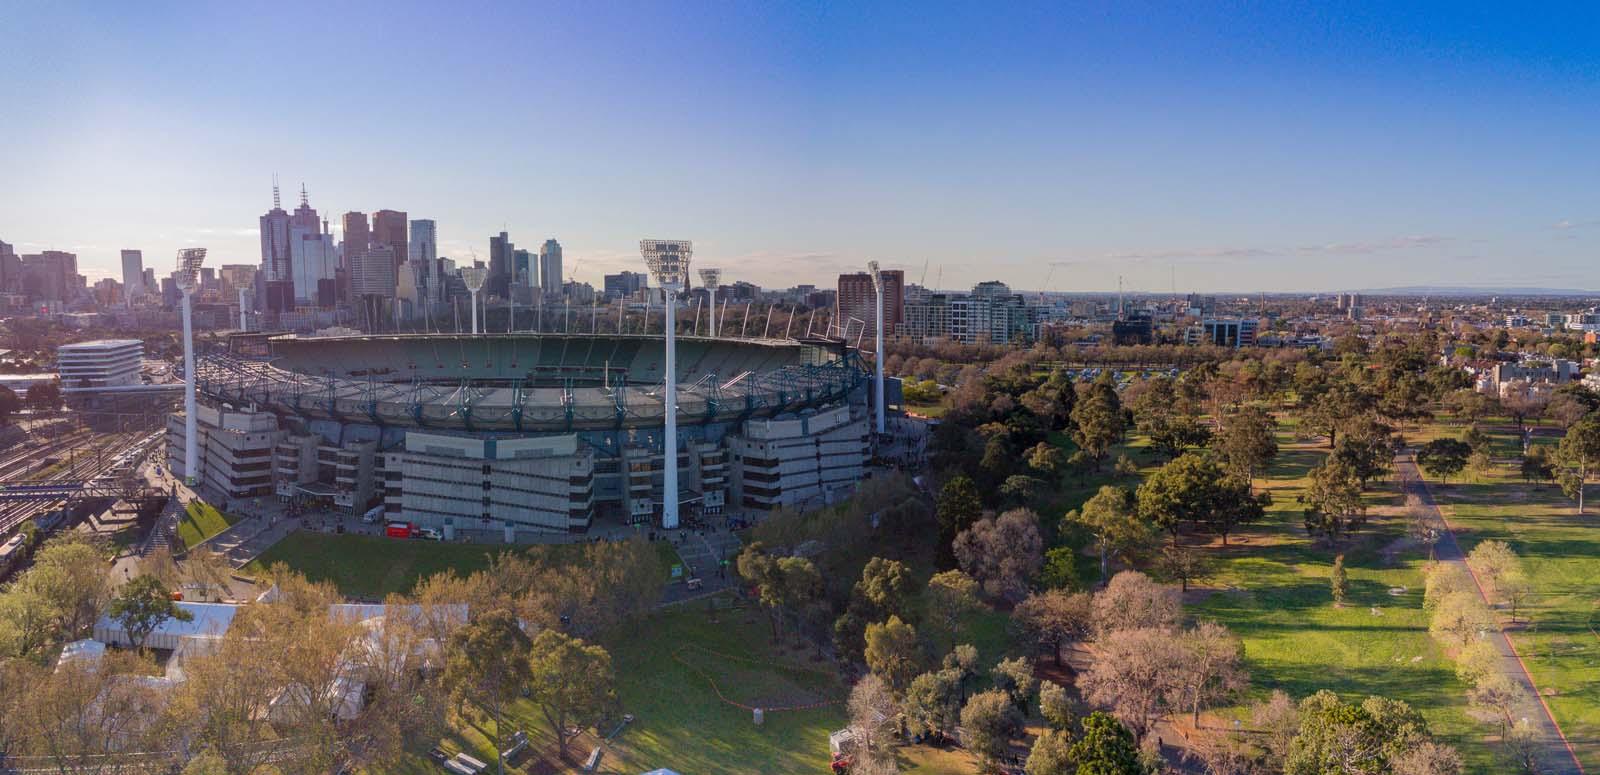 An aerial view of the Melbourne Cricket Ground with the city skyline